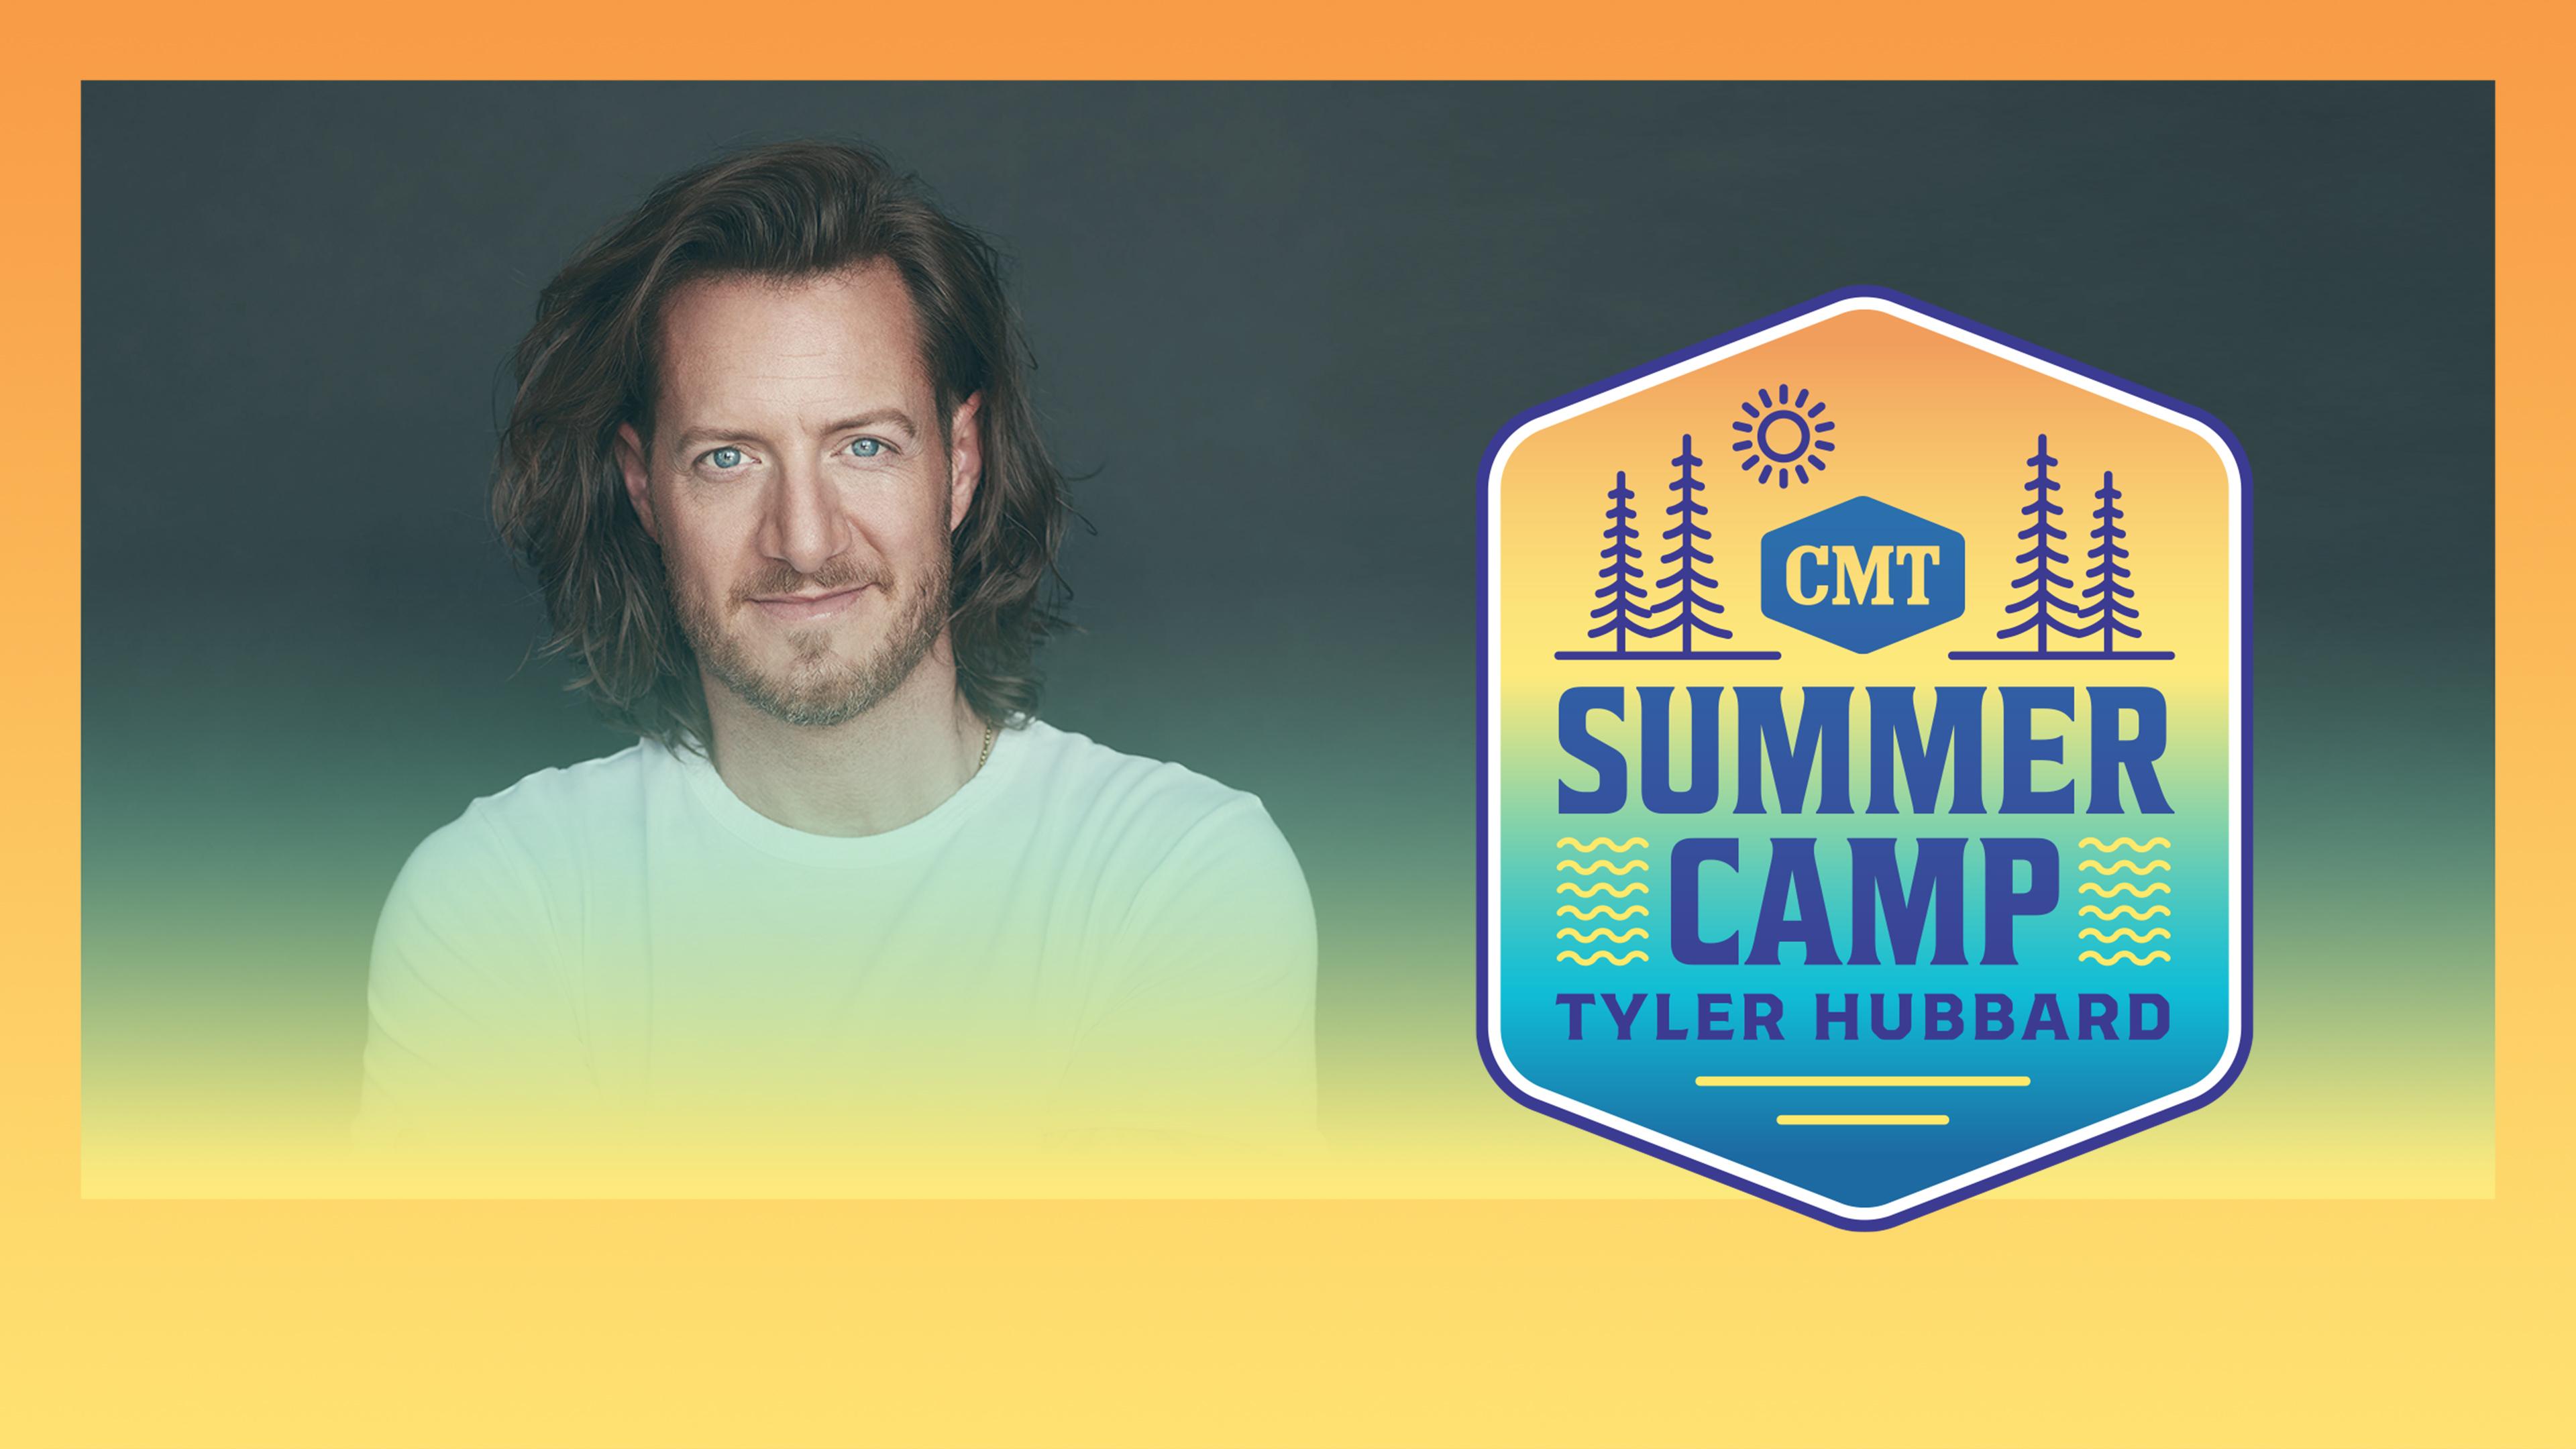 Watch CMT Summer Camp Tyler Hubbard Streaming Online on Philo (Free Trial)